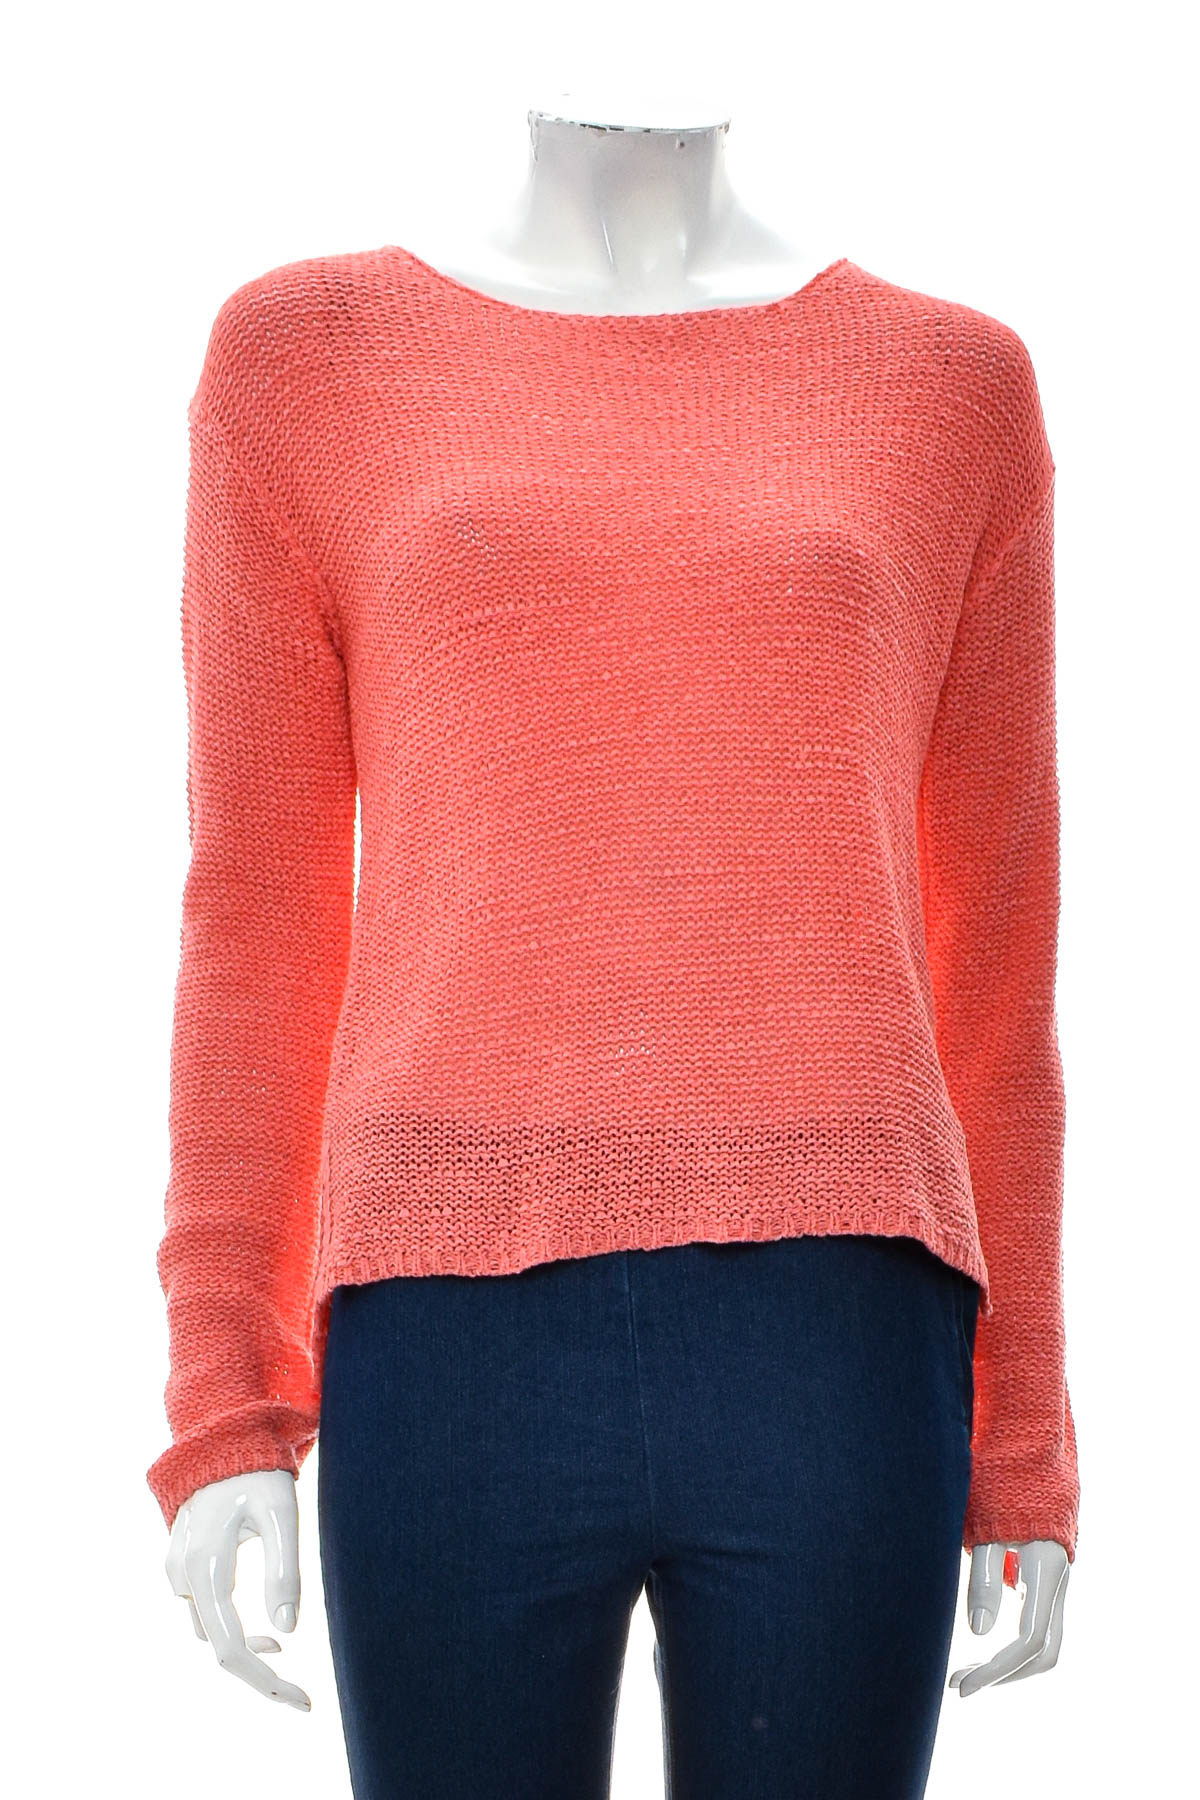 Women's sweater - Colours of the world - 0